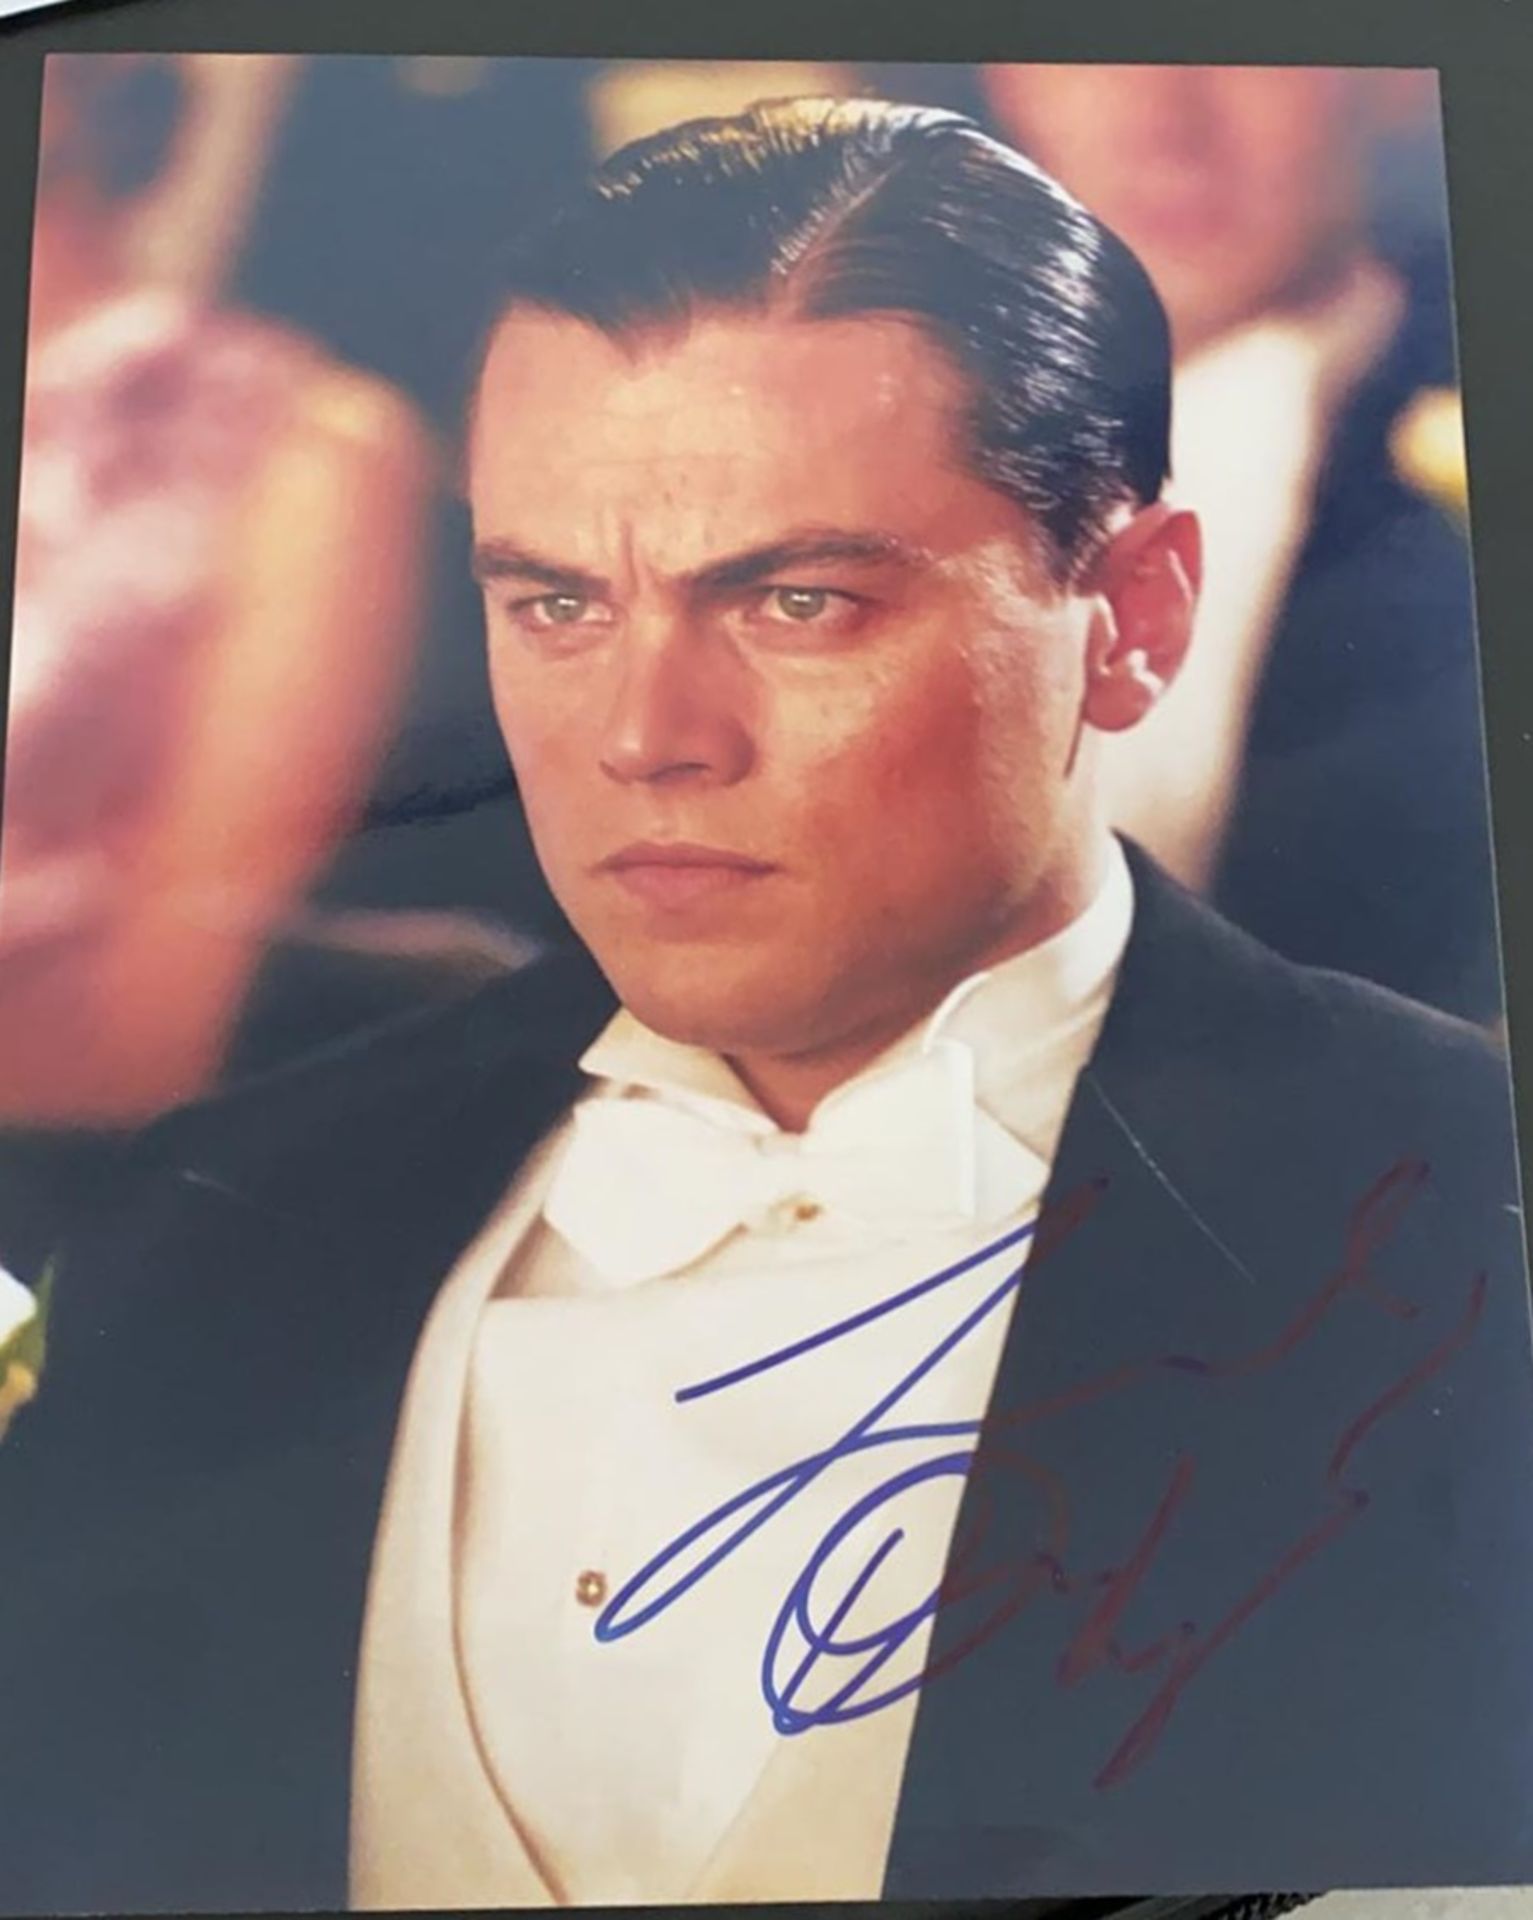 1 x Signed Autograph Picture - LEONARDO DICAPRIO - With COA - Size 12 x 8 Inch - CL590 - NO VAT ON - Image 2 of 3